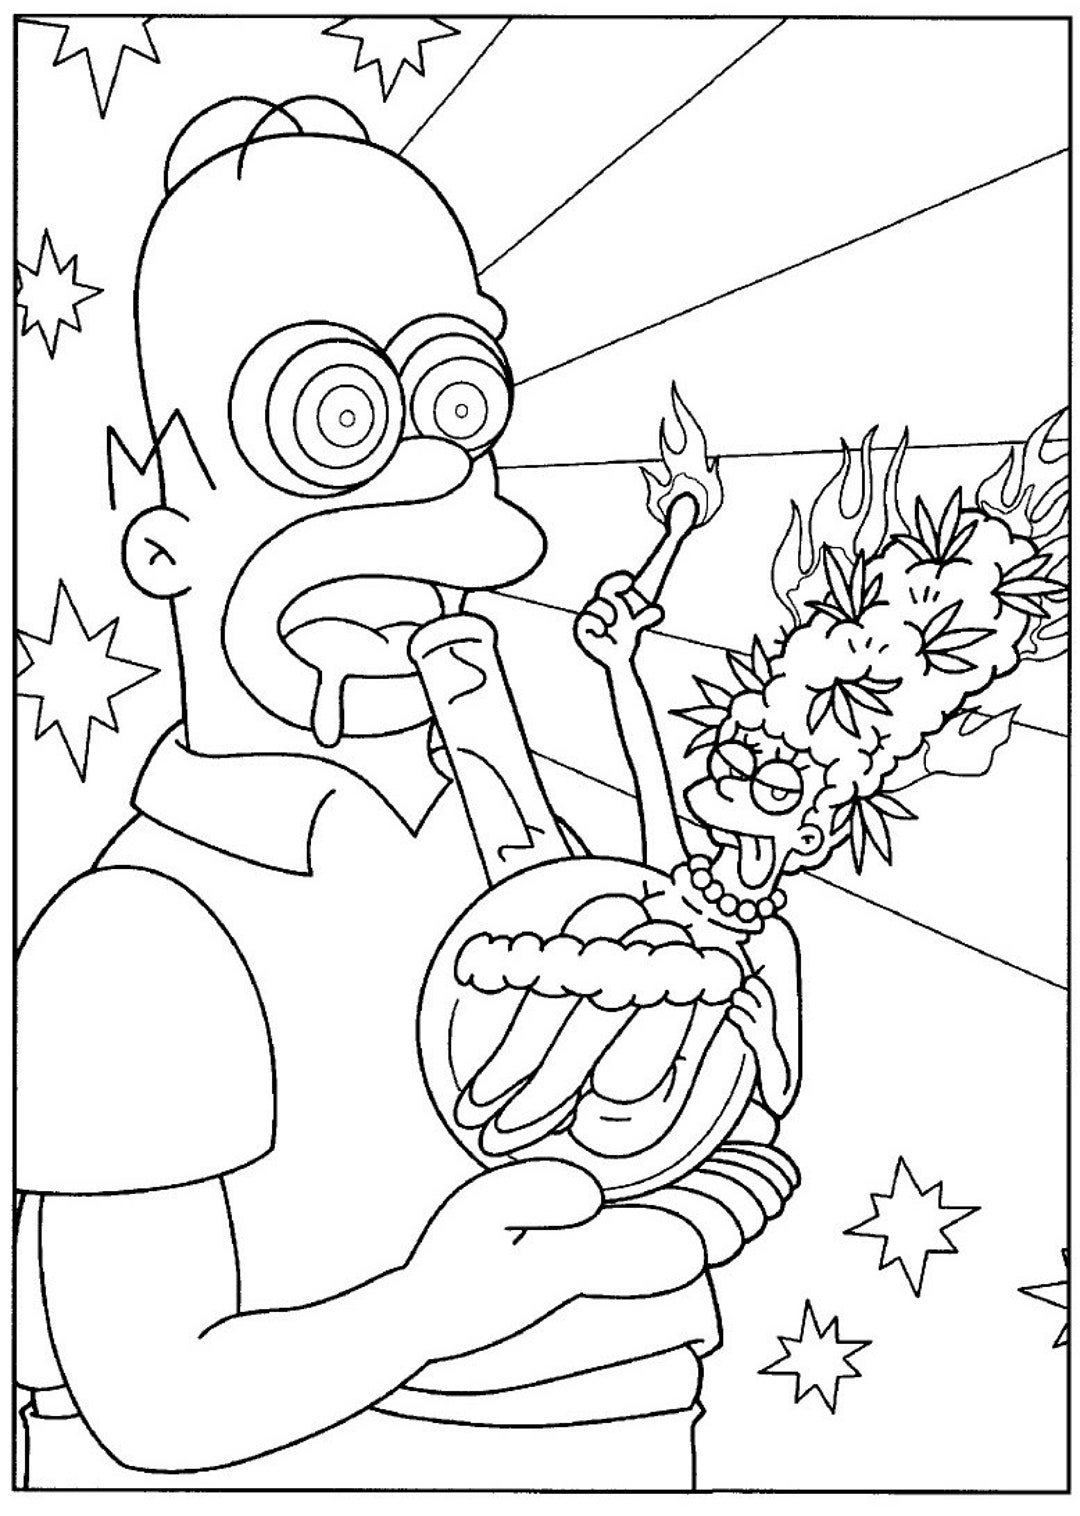 The Simpsons Stoner Pdf Coloring Book Page 7 1 Etsy